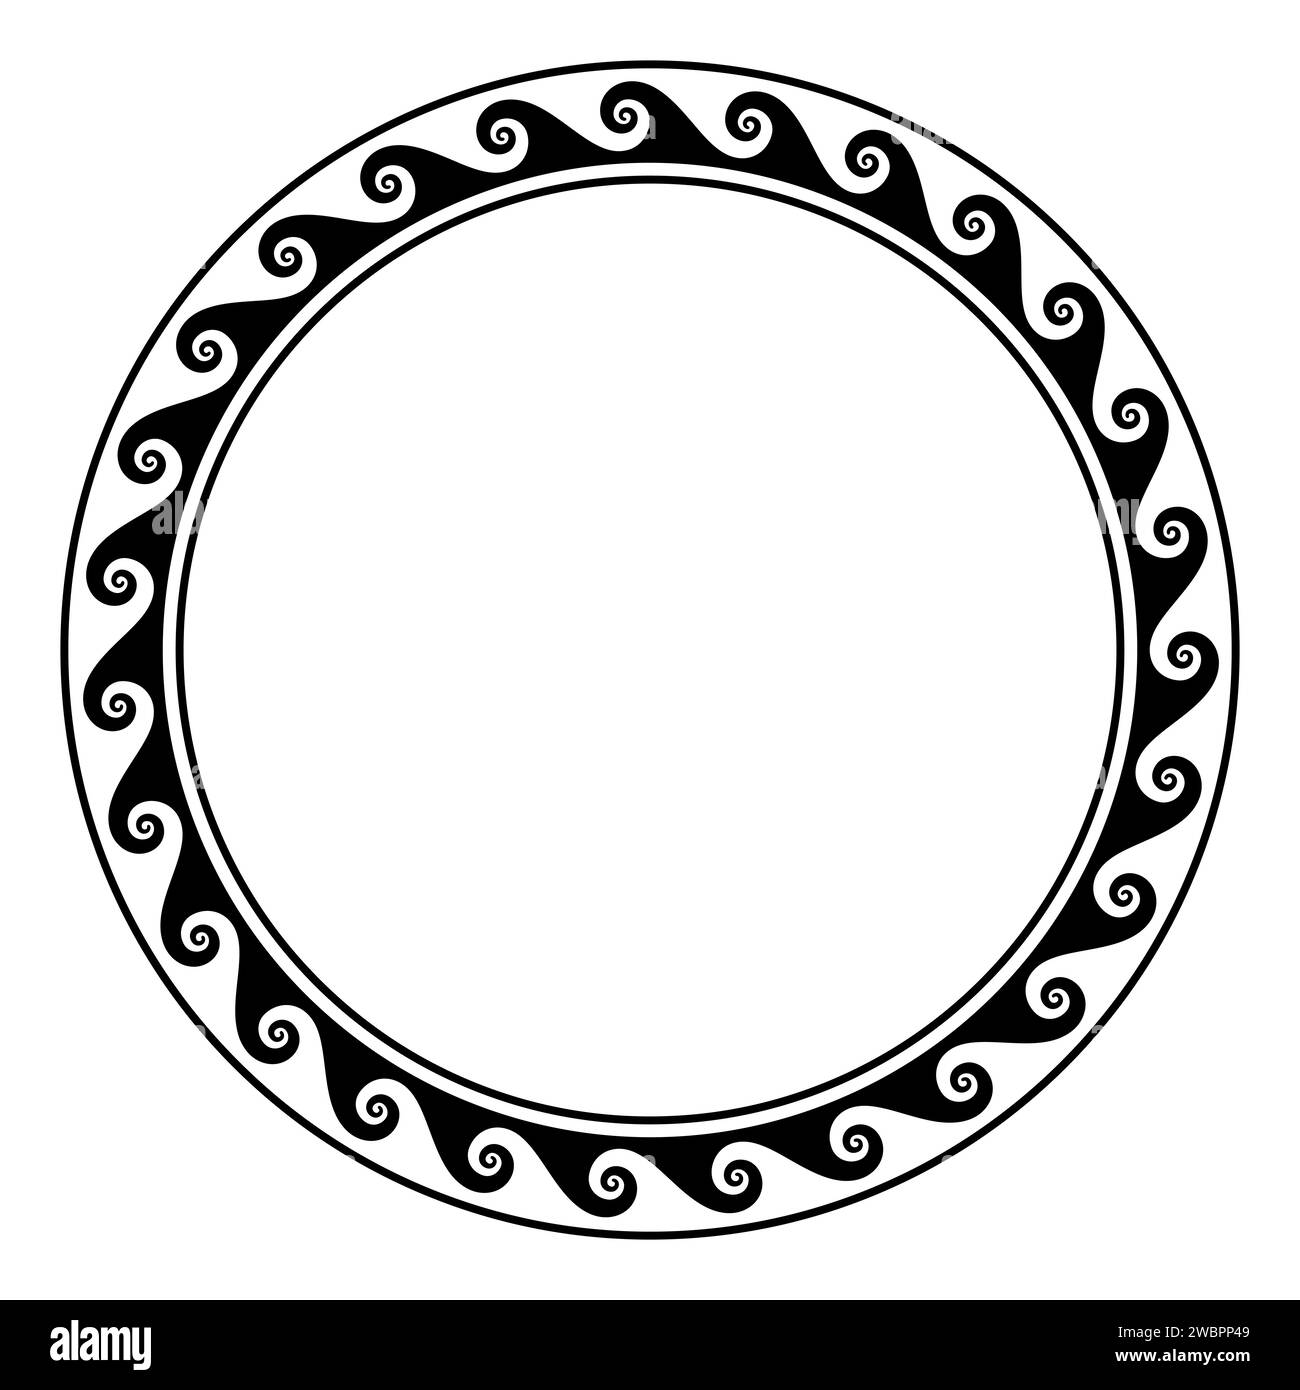 Sea wave pattern, circle frame with seamless meander design. Also known as running dog, scroll or Vitruvian wave pattern. Stock Photo